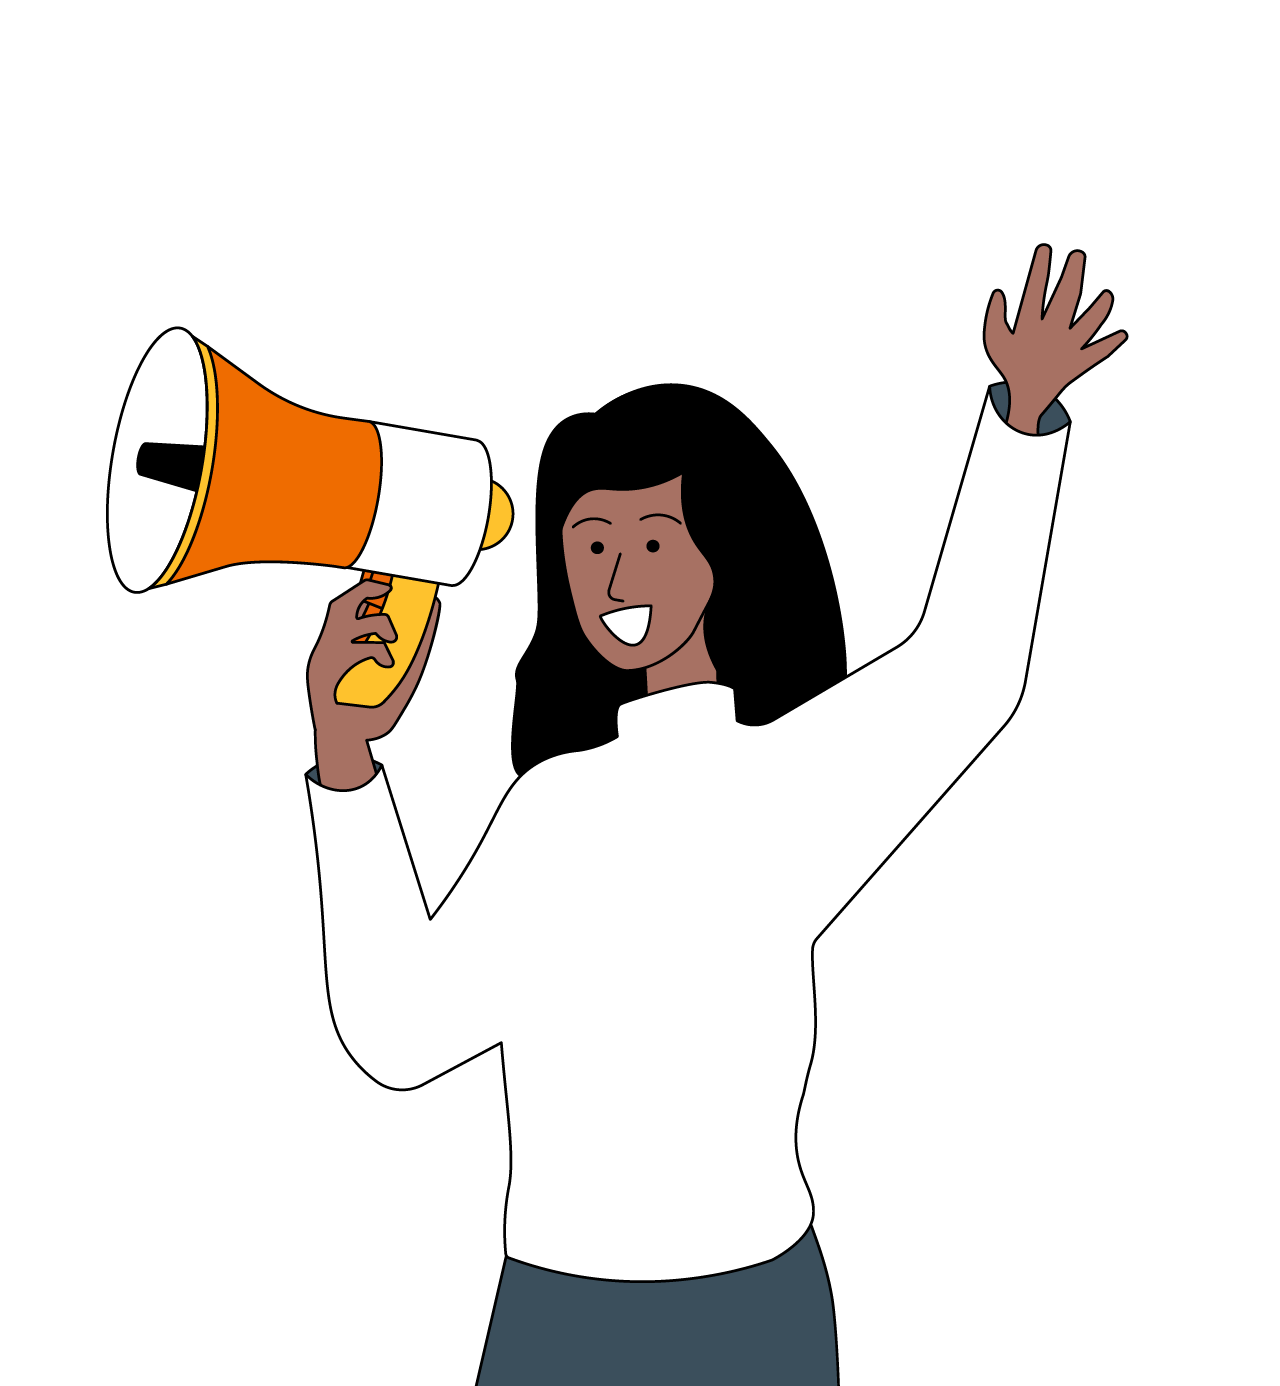 IWD2023 animation of a smiling young woman holding a megaphone